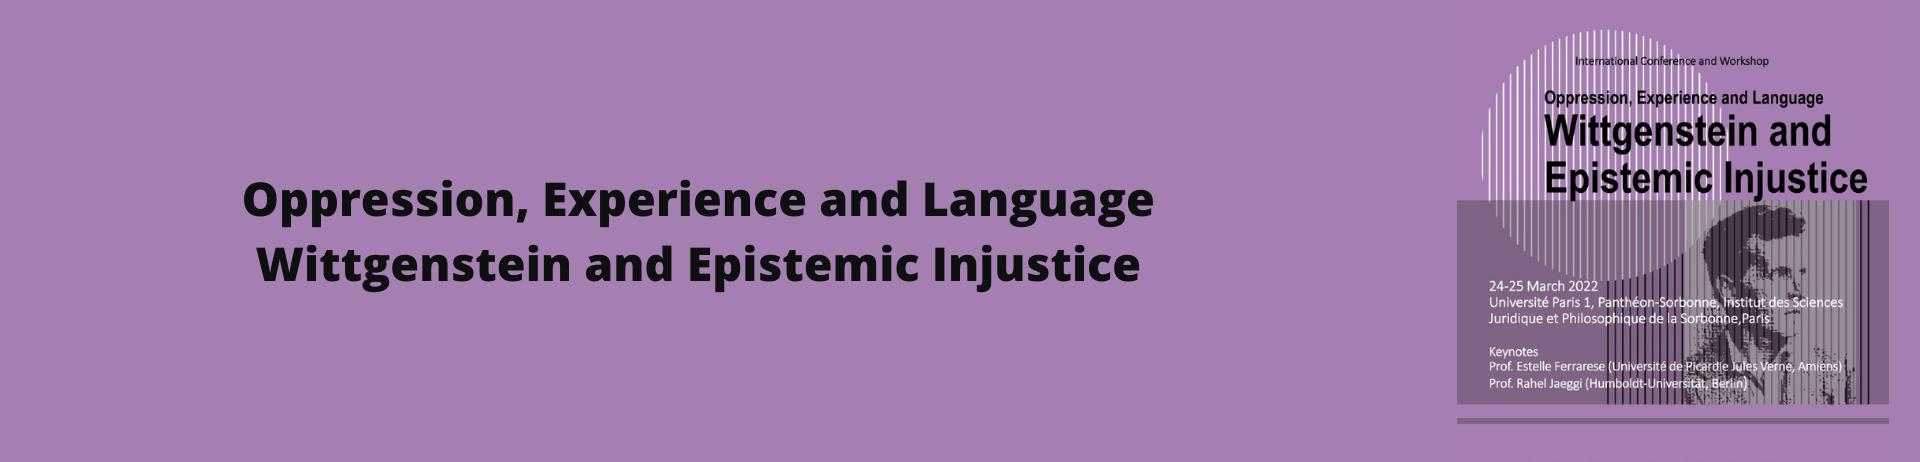 Bannière Oprression, Experience and language. Wittgenstein and Epistemic injustice